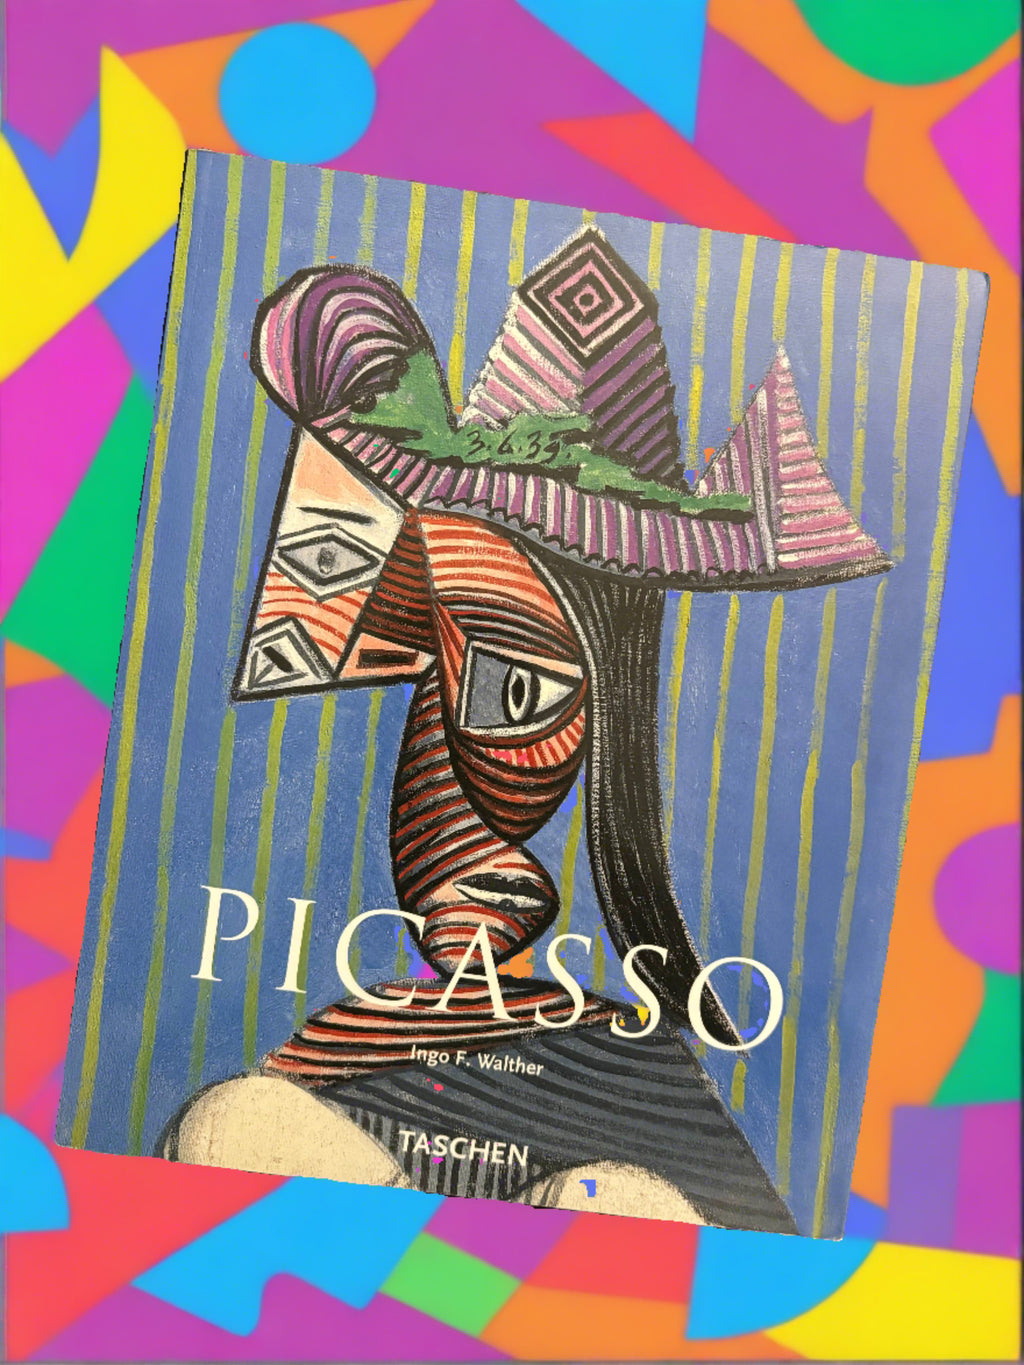 Pablo Picasso 1881-1973: Genius of the Century- By Ingo F. Walther